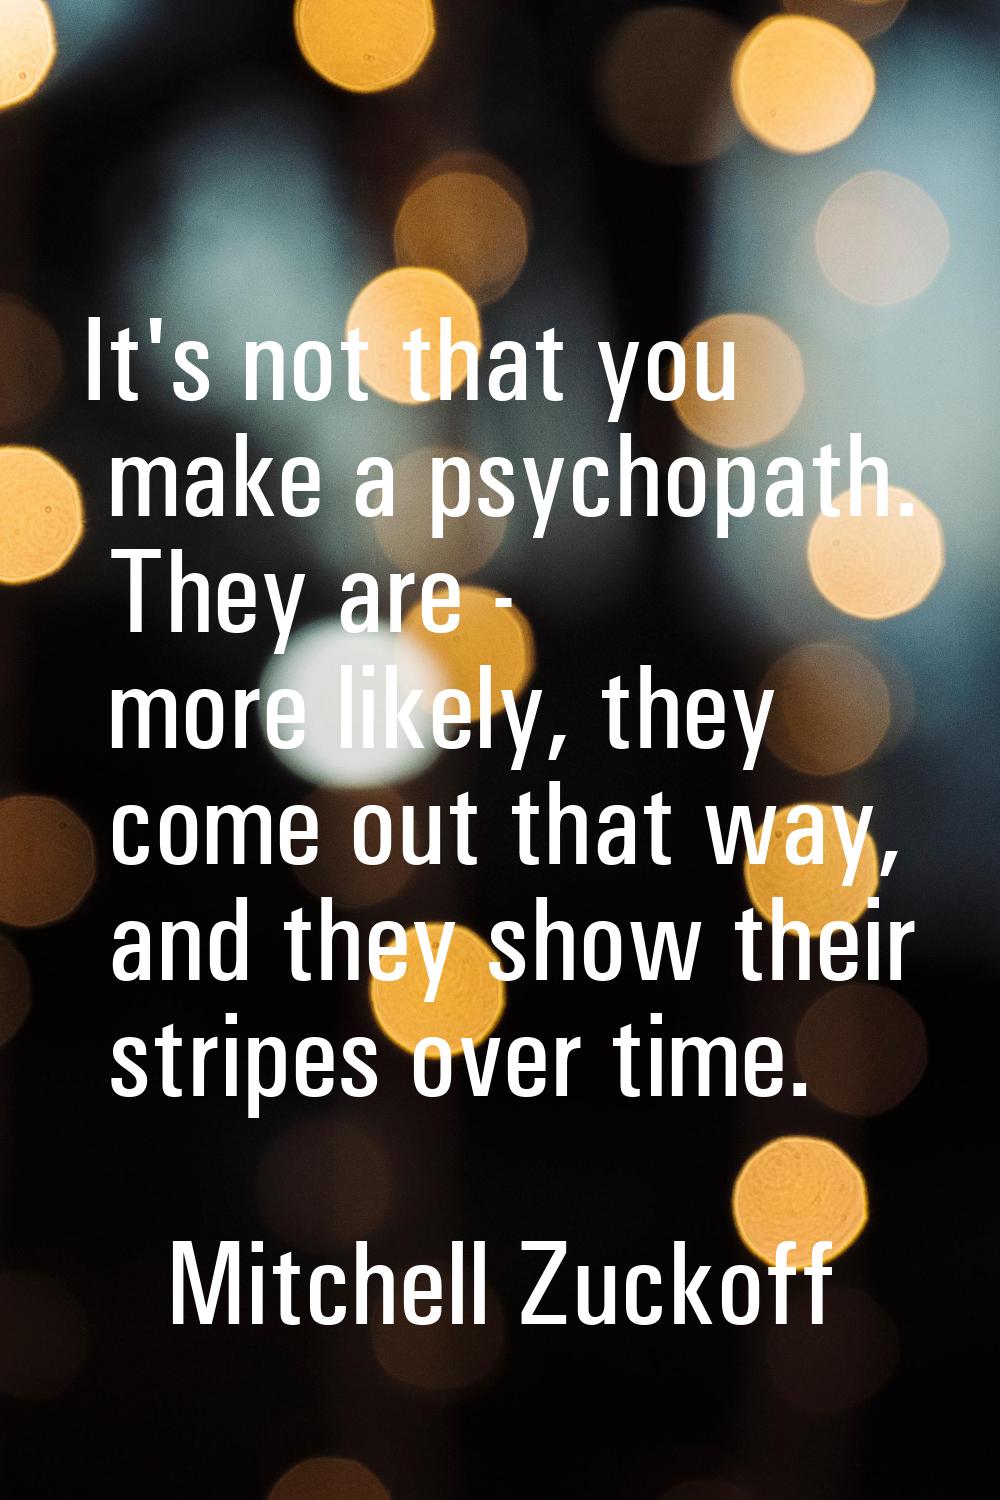 It's not that you make a psychopath. They are - more likely, they come out that way, and they show 